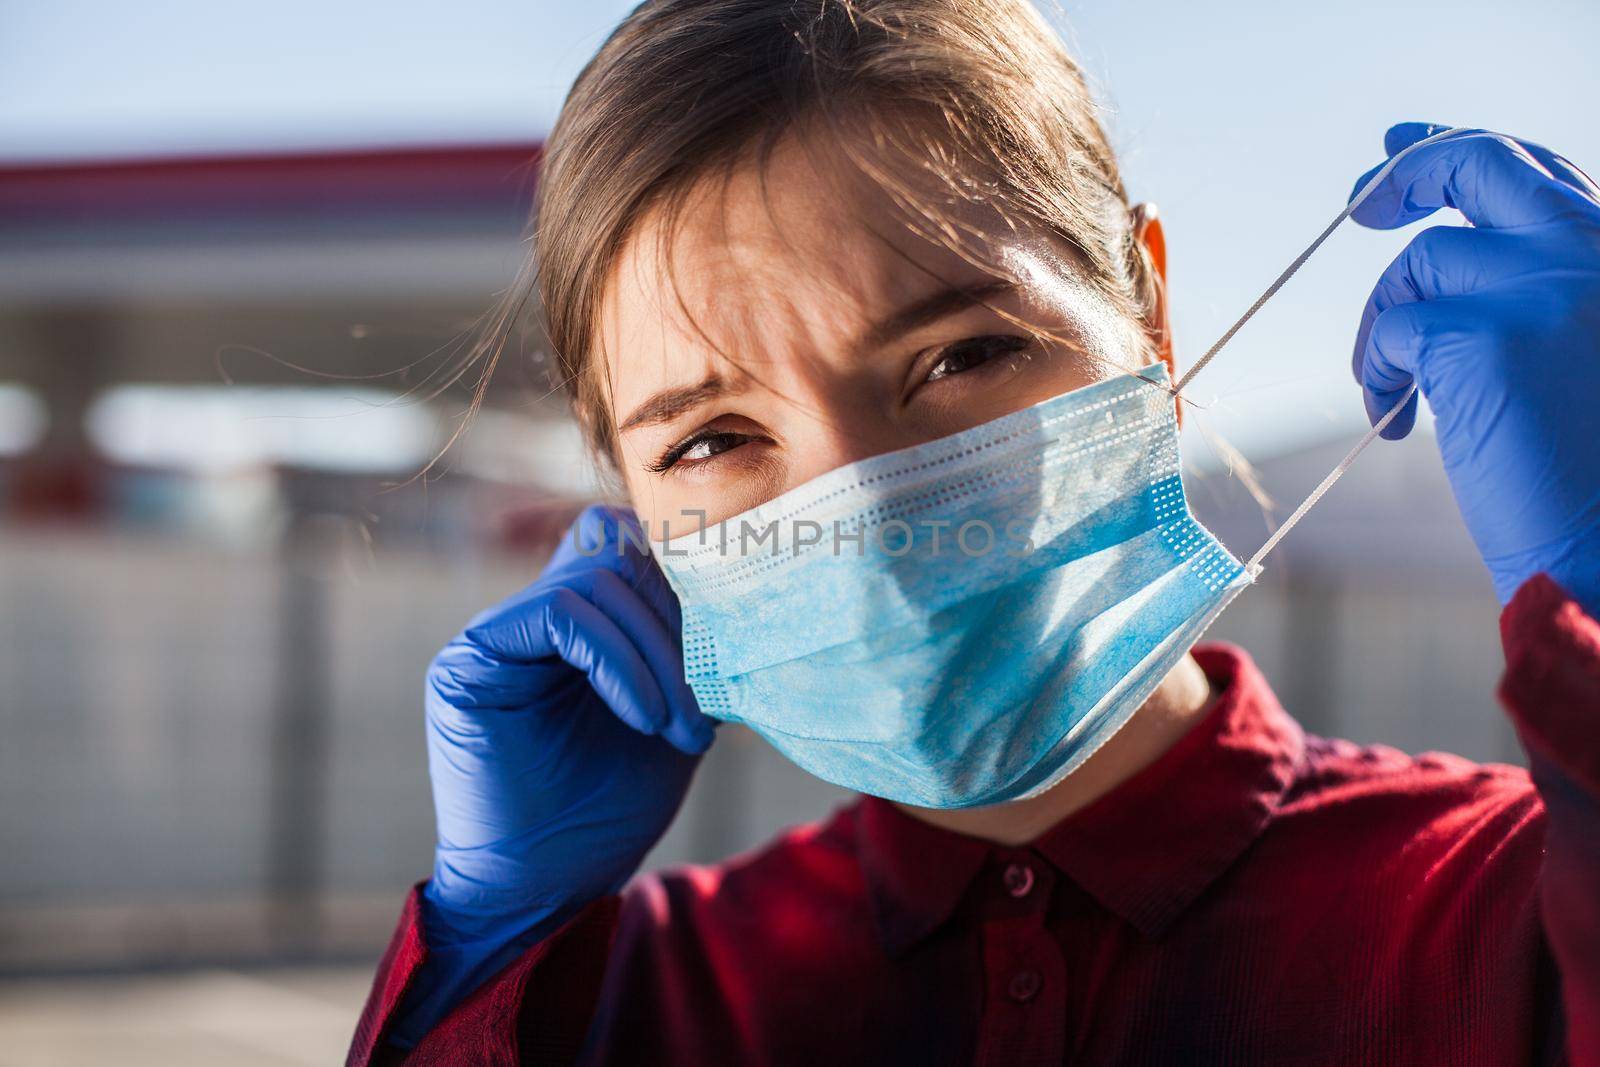 Worried young woman putting PPE face mask on/taking it off in public,wearing protective blue latex surgical gloves,looking at camera with stress and anxiety,new normal for everyday life after COVID-19